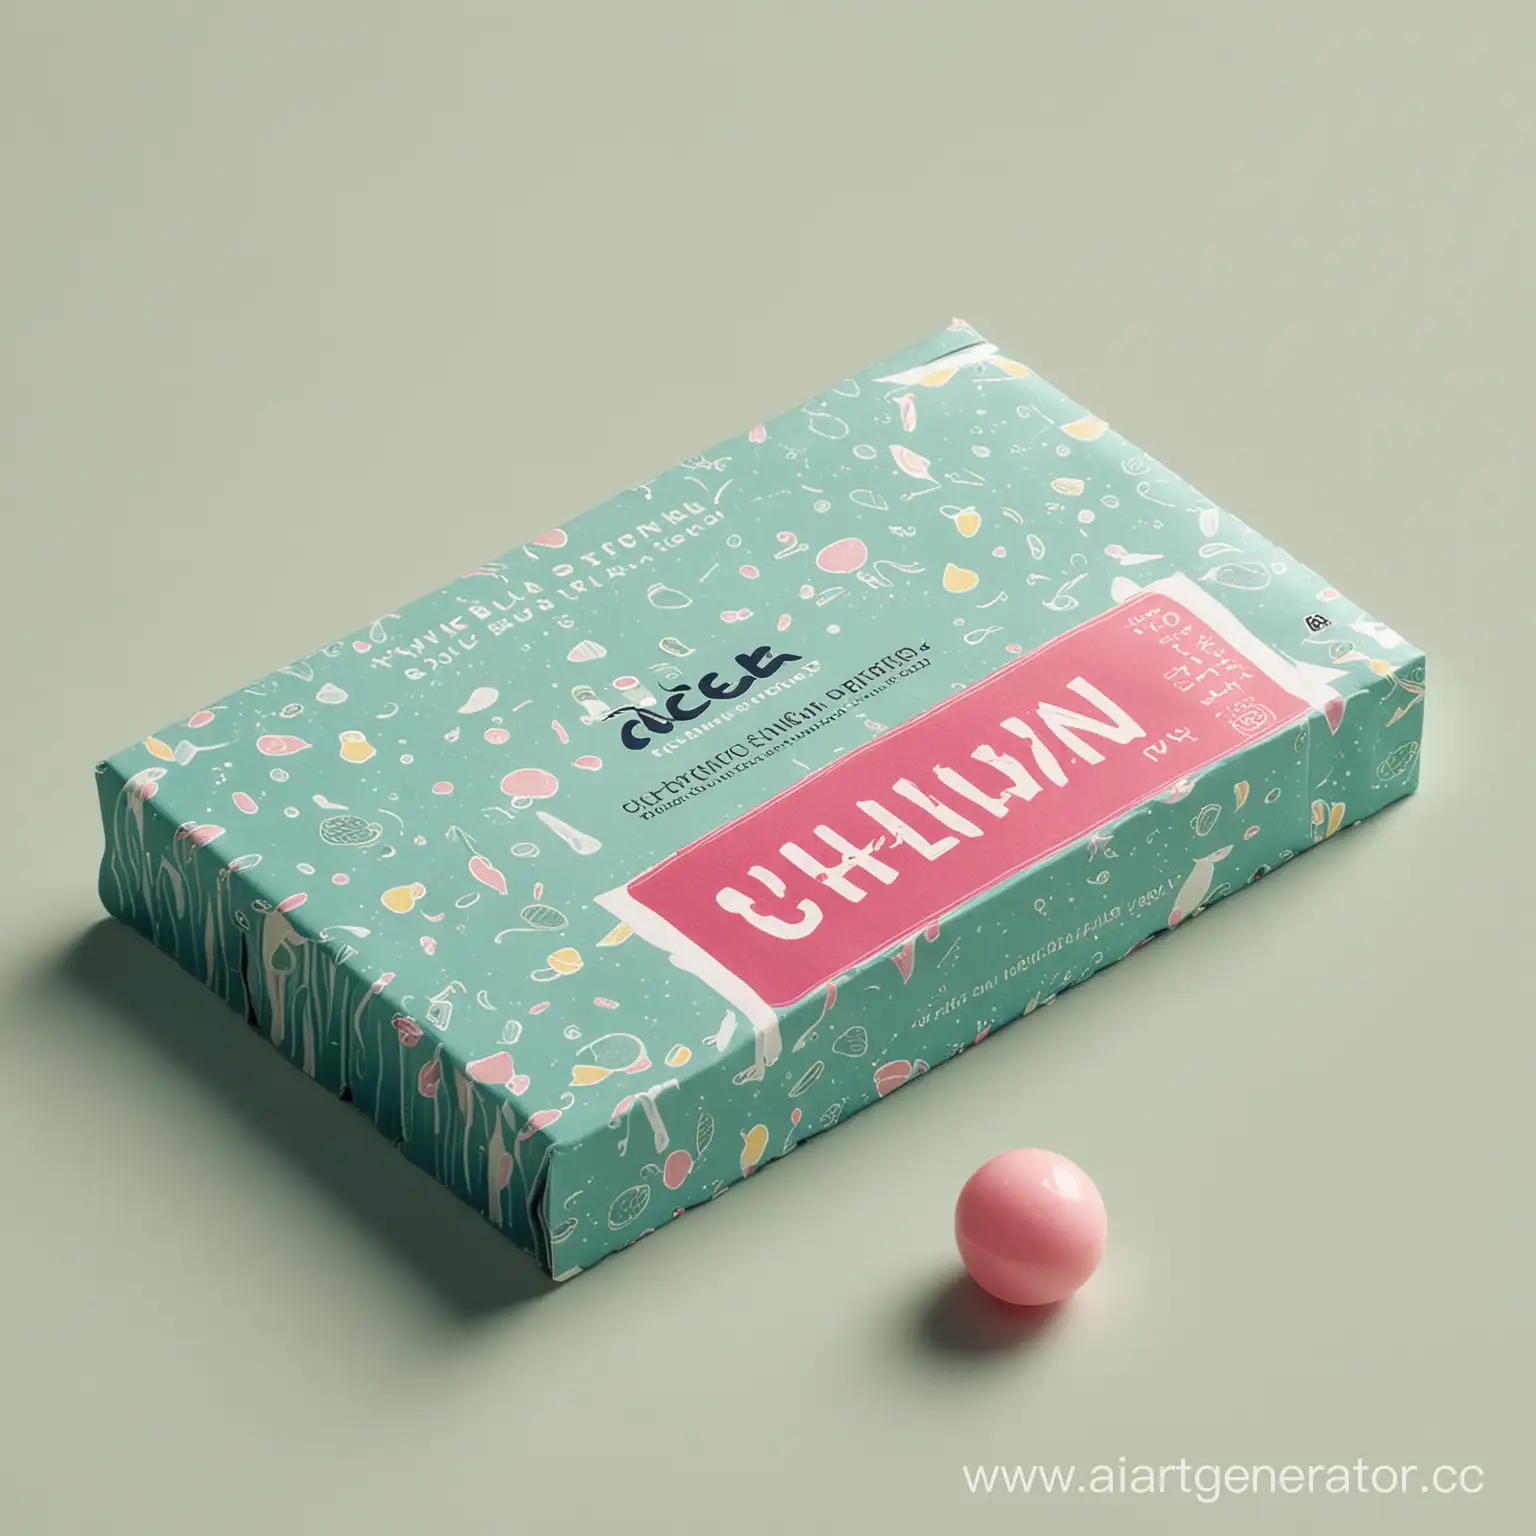 Colorful-Chewing-Gum-Packaging-Displayed-in-a-Vibrant-Array